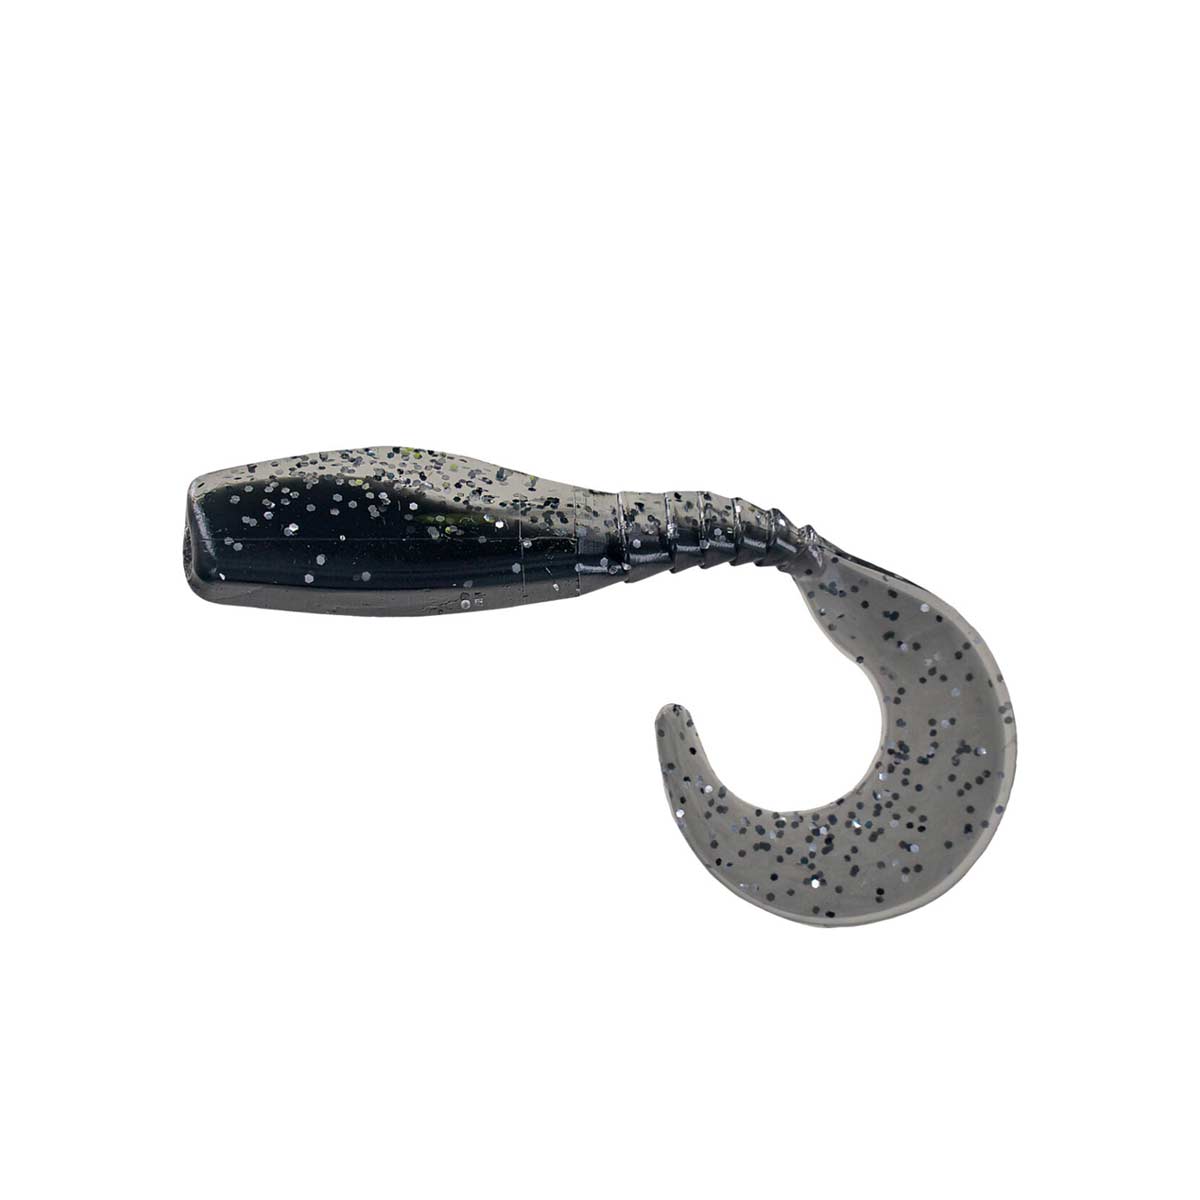 Curly Tail Crappie Minnow_Black Flash